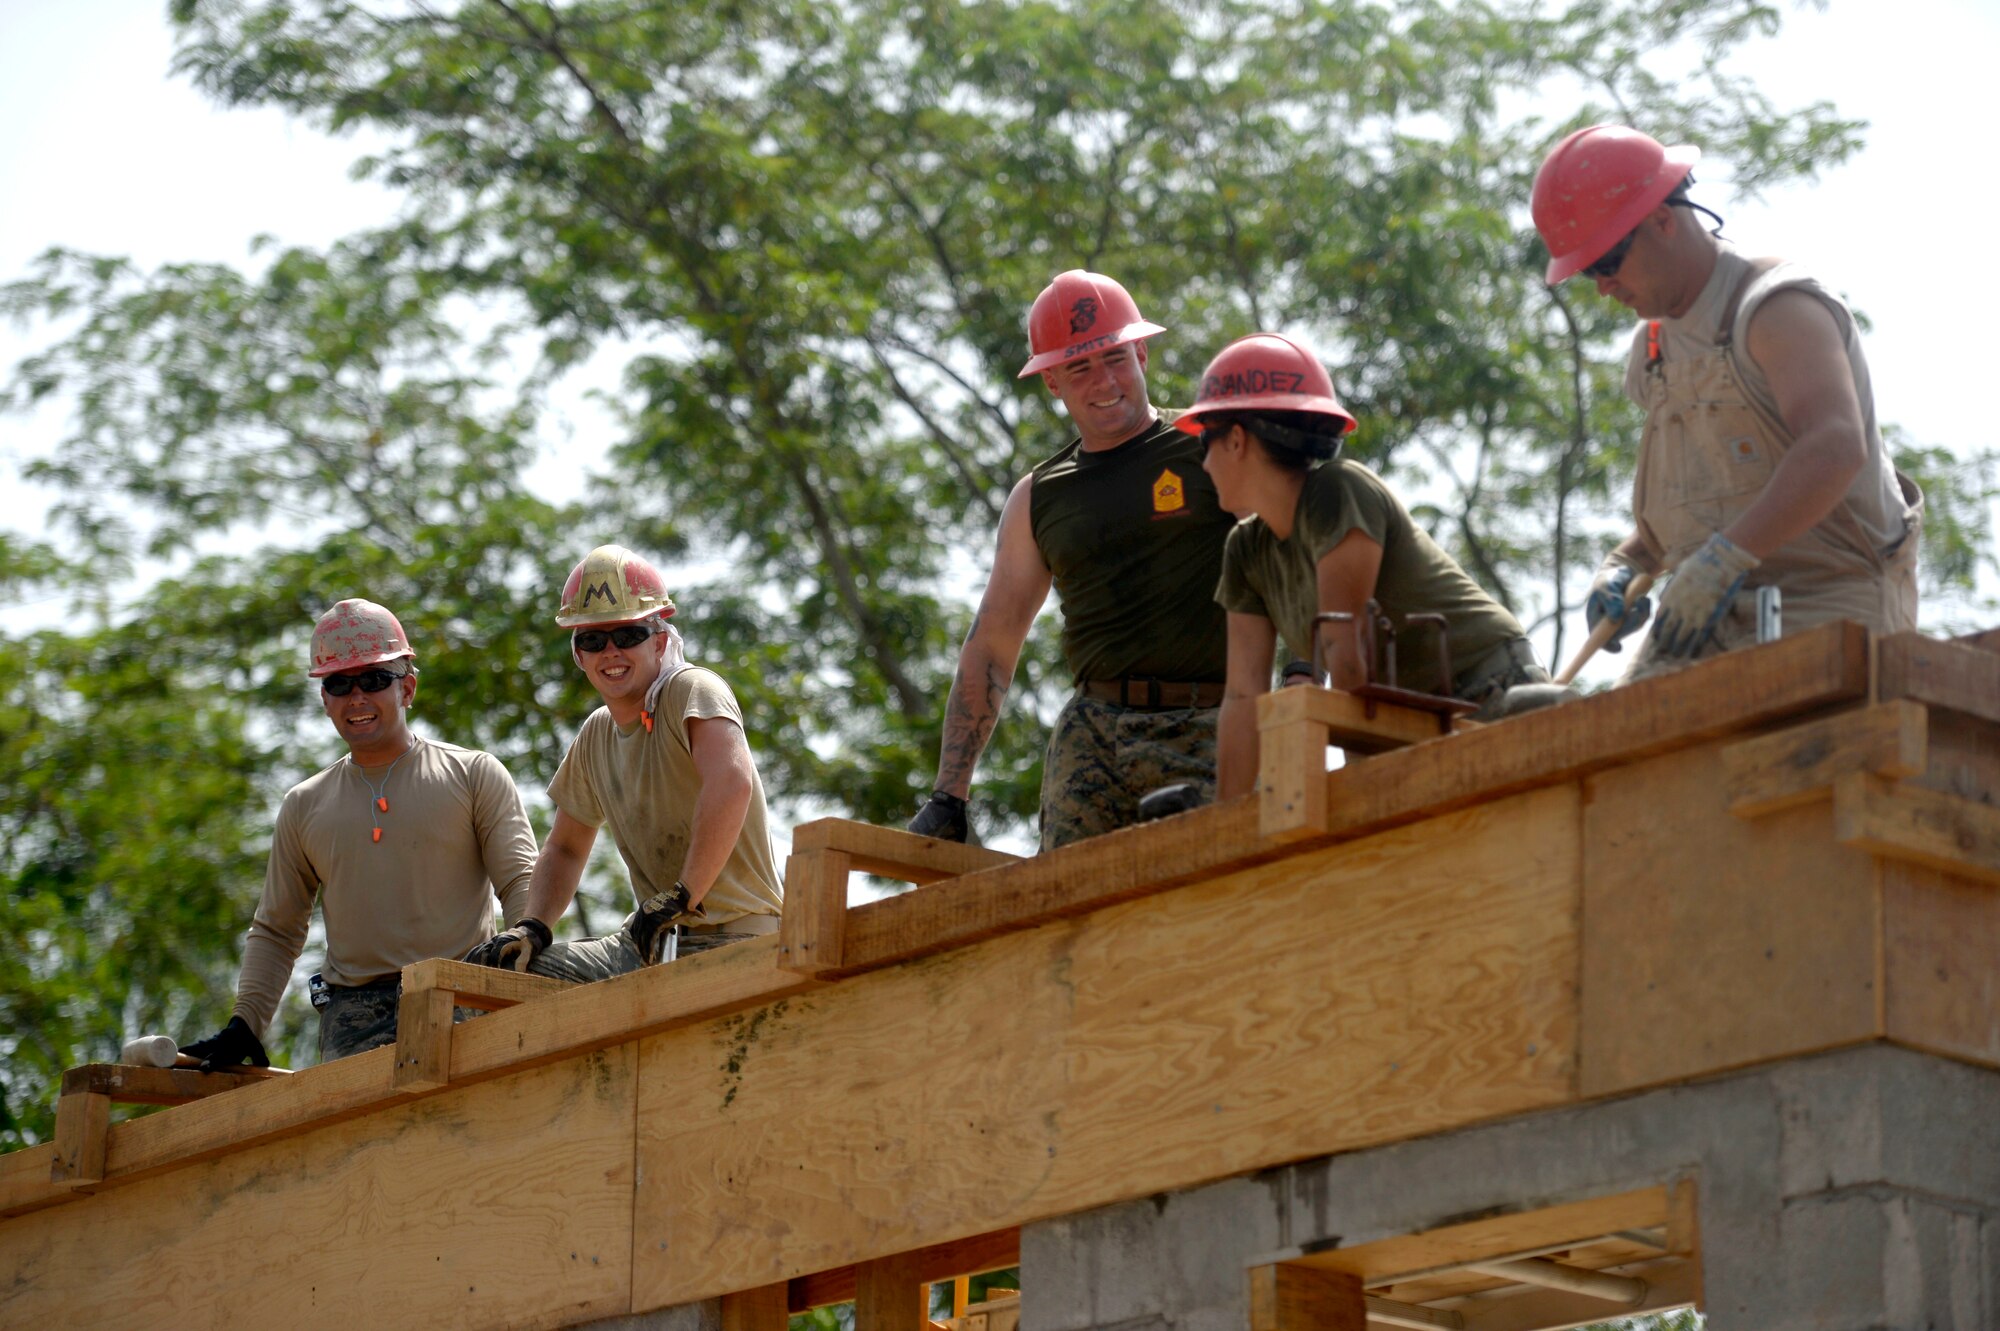 Airmen from the 823rd Expeditionary RED HORSE Squadron, and Marines from the 271st Marine Wing Support Squadron, 2nd Marine Air Wing, work on the bond beam which will be used to hold the roof of the new two-room schoolhouse at the Gabriela Mistral primary school site in the village of Ocotes Alto near Trujillo, Honduras, June 22, 2015. The building is one of multiple projects going on in and around Trujillo and Tocoa as part of NEW HORIZONS Honduras 2015 training exercise. NEW HORIZONS was launched in the 1980s and is an annual joint humanitarian assistance exercise that U.S. Southern Command conducts with a partner nation in Central America, South America or the Caribbean. The exercise improves joint training readiness of U.S. and partner nation civil engineers, medical professionals and support personnel through humanitarian assistance activities. (U.S. Air Force photo by Capt. David J. Murphy/Released)